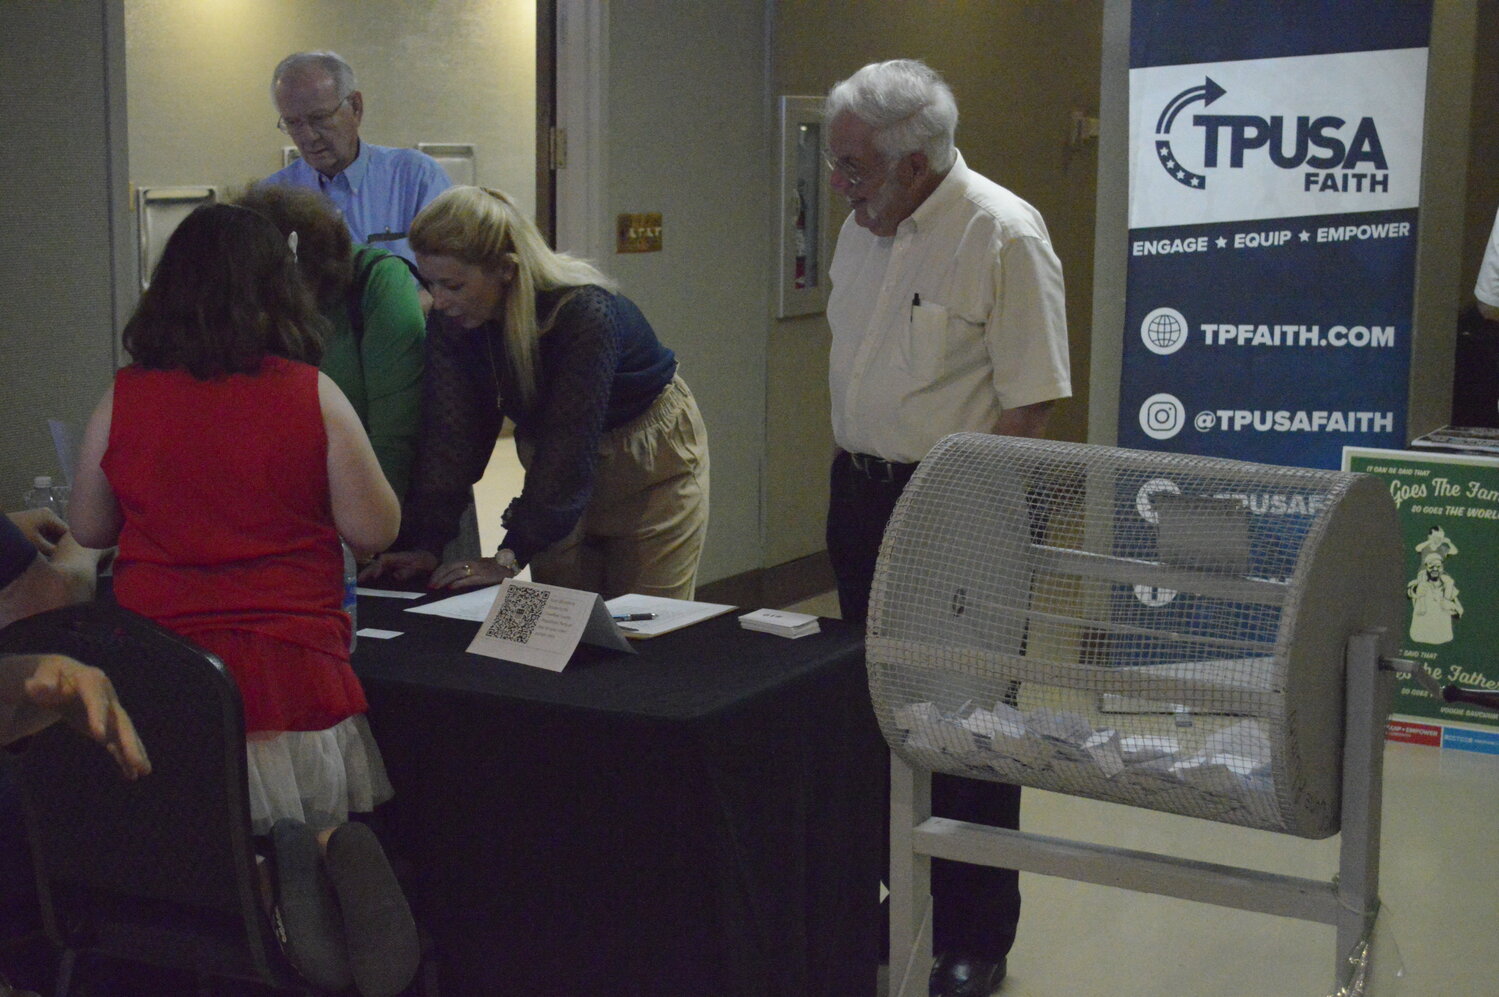 Some attendees of the Crawford County Republican Party’s Dinner and Discussion event Saturday, May 20 at Pittsburg’s Memorial Auditorium participated in a raffle drawing, hoping to win either a rifle or a shotgun.